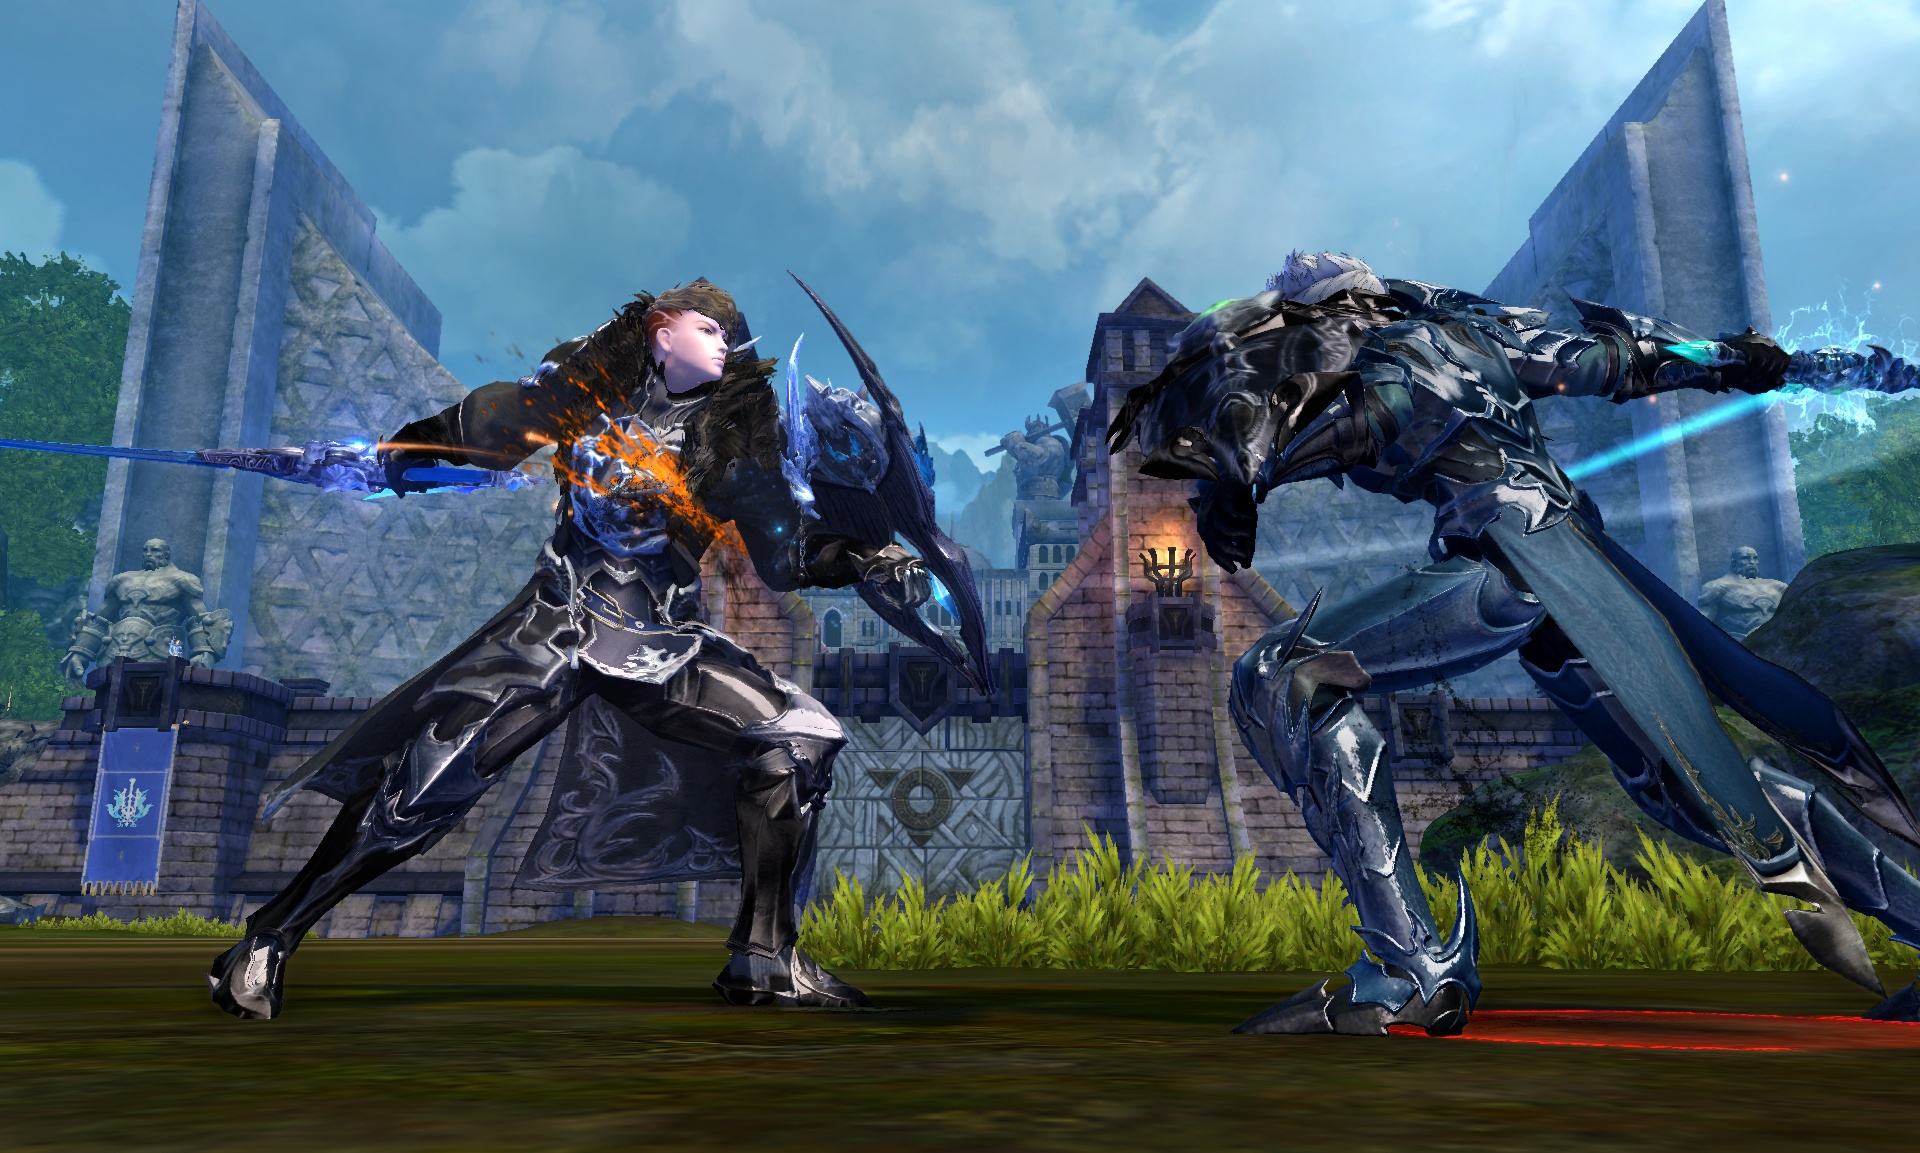 Aion Free To Play Fantasy Mmorpg For Pc Steam And Consoles